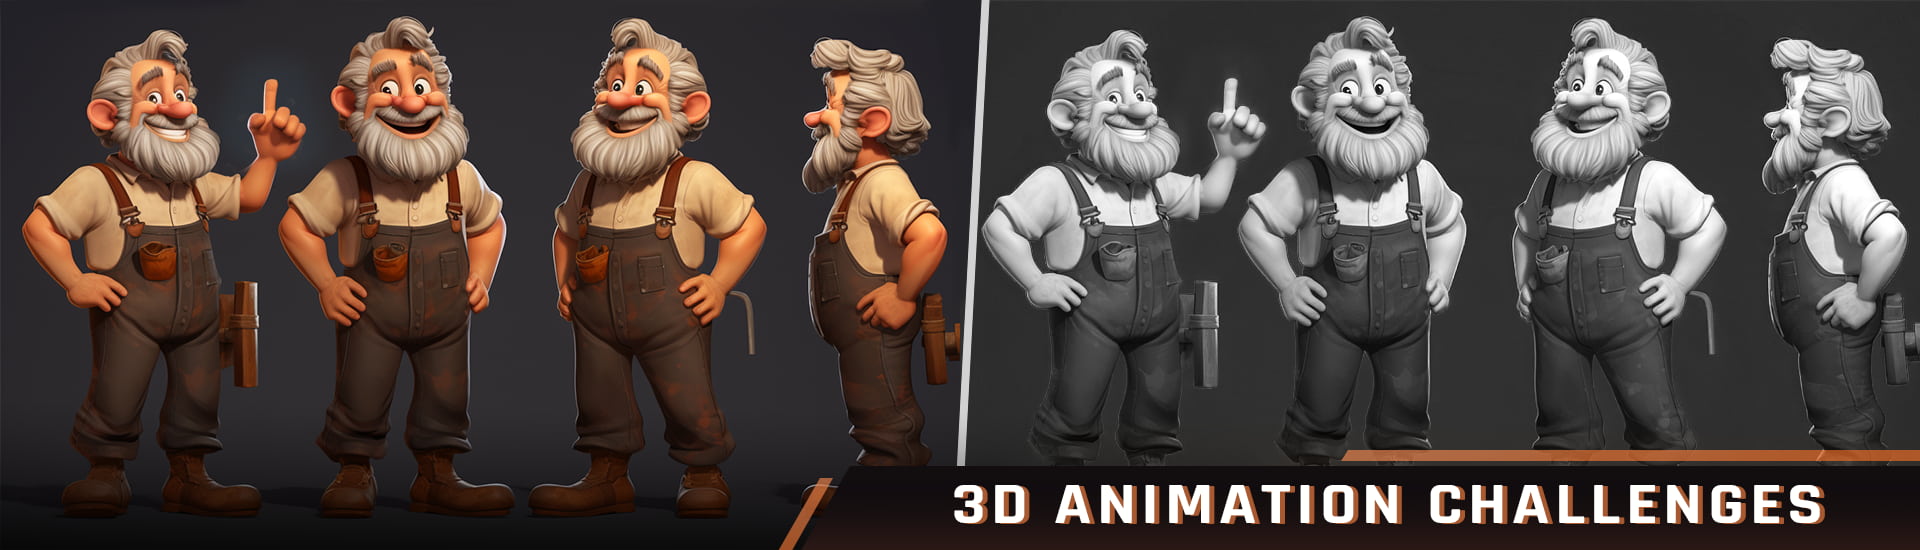 3D Animation Challenges